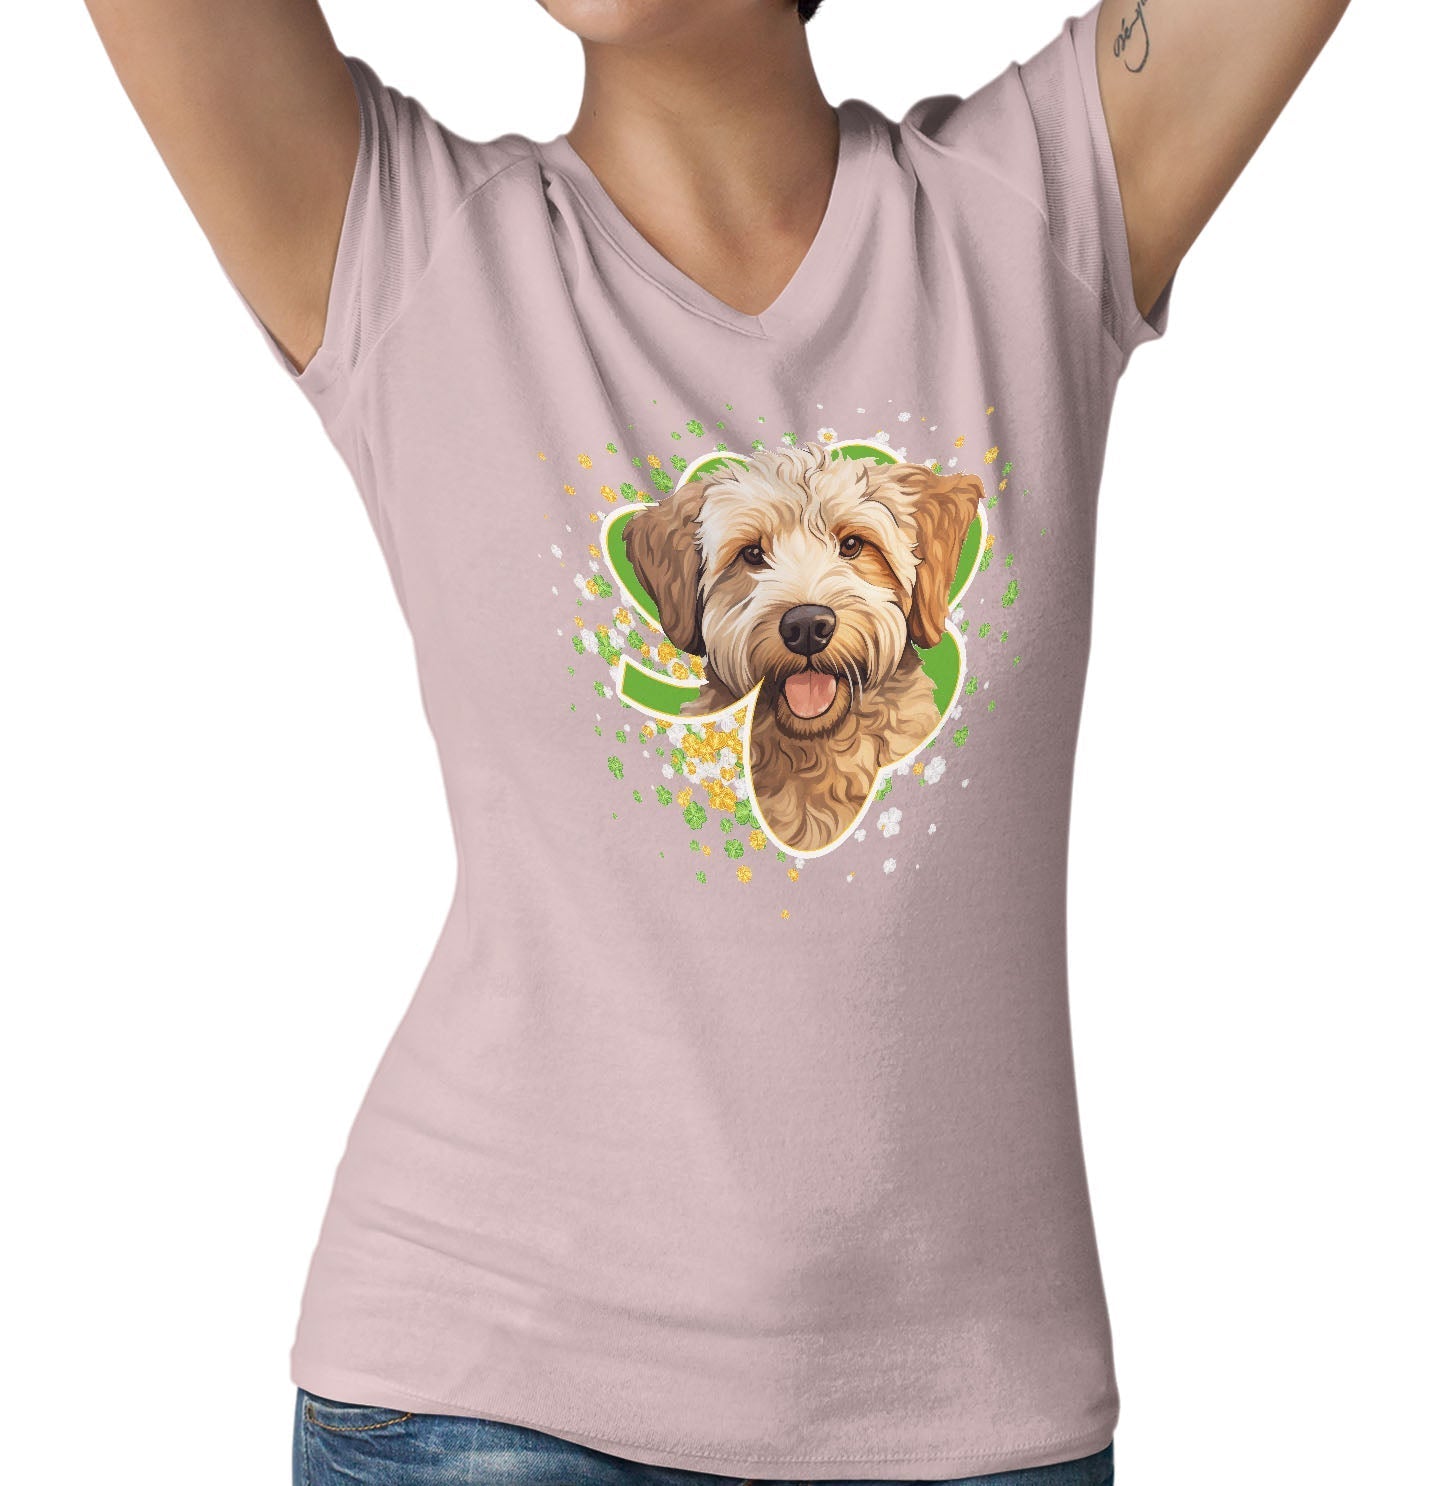 Big Clover St. Patrick's Day Labradoodle (Yellow) - Women's V-Neck T-Shirt